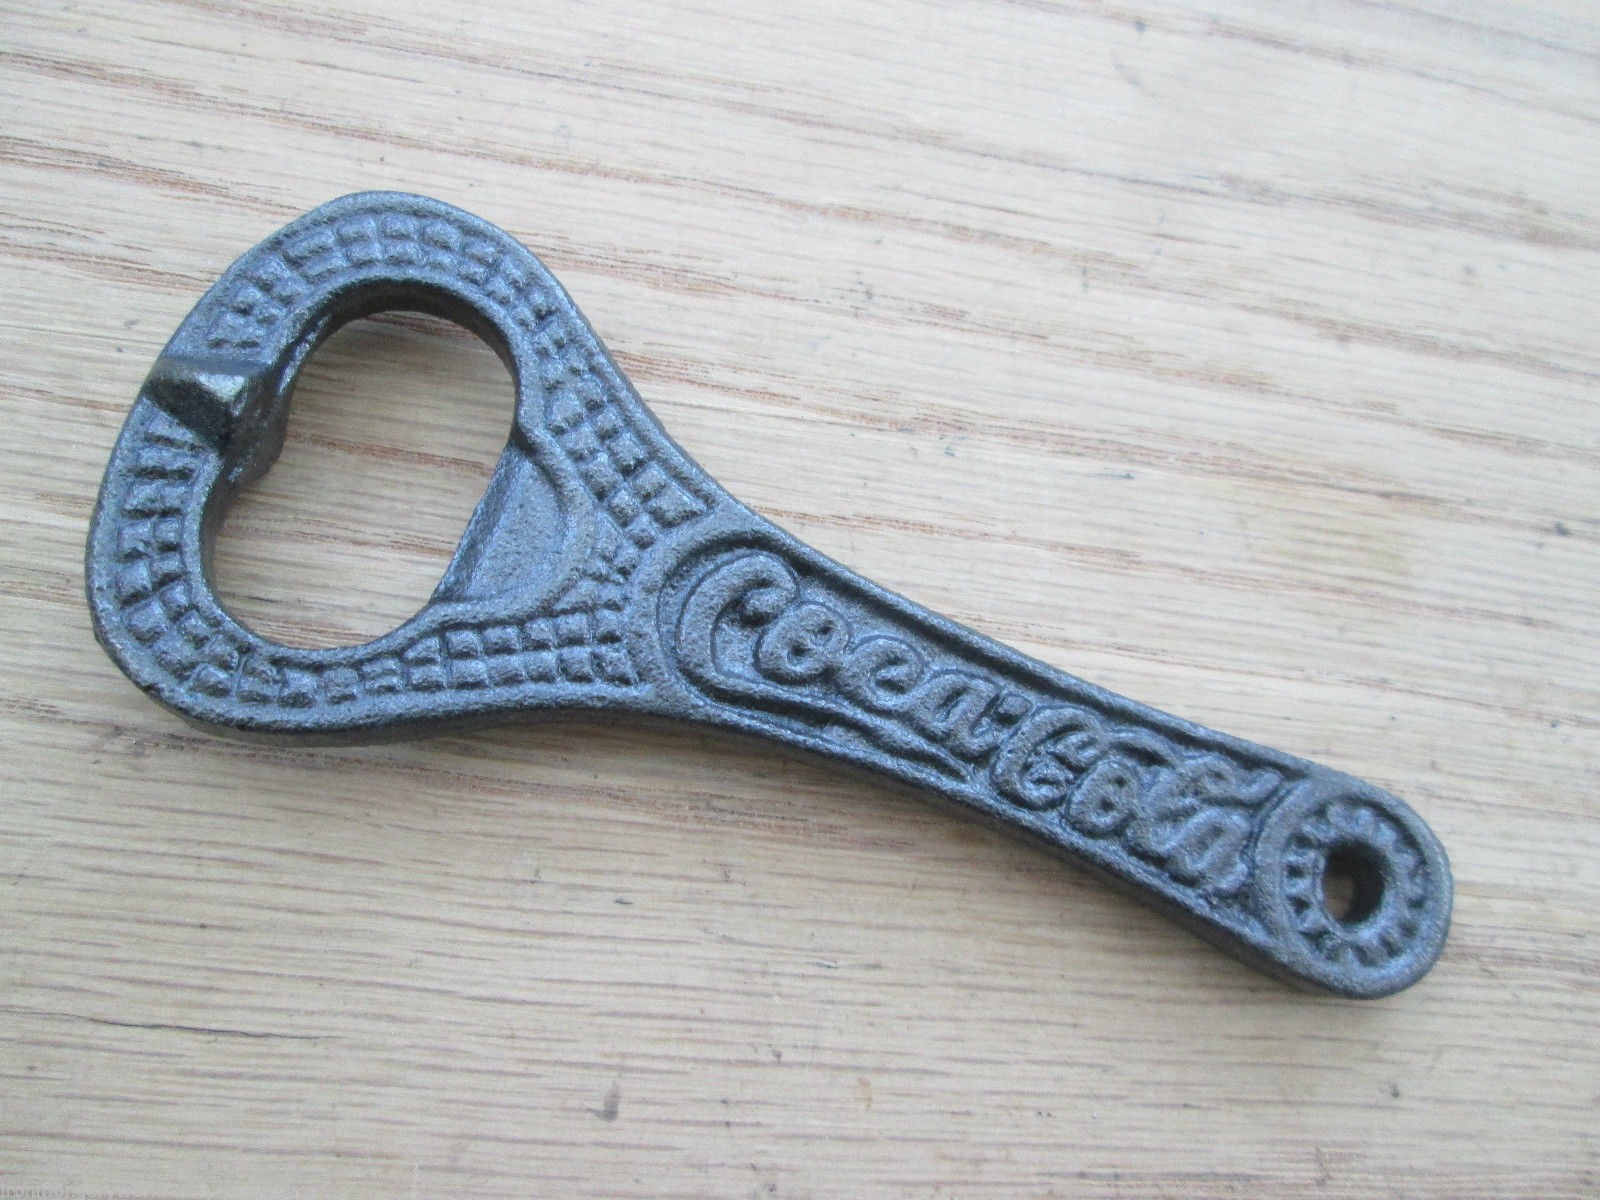 Cast iron Vintage rustic style Collectable Wall mounted Beer Bottle Opener 